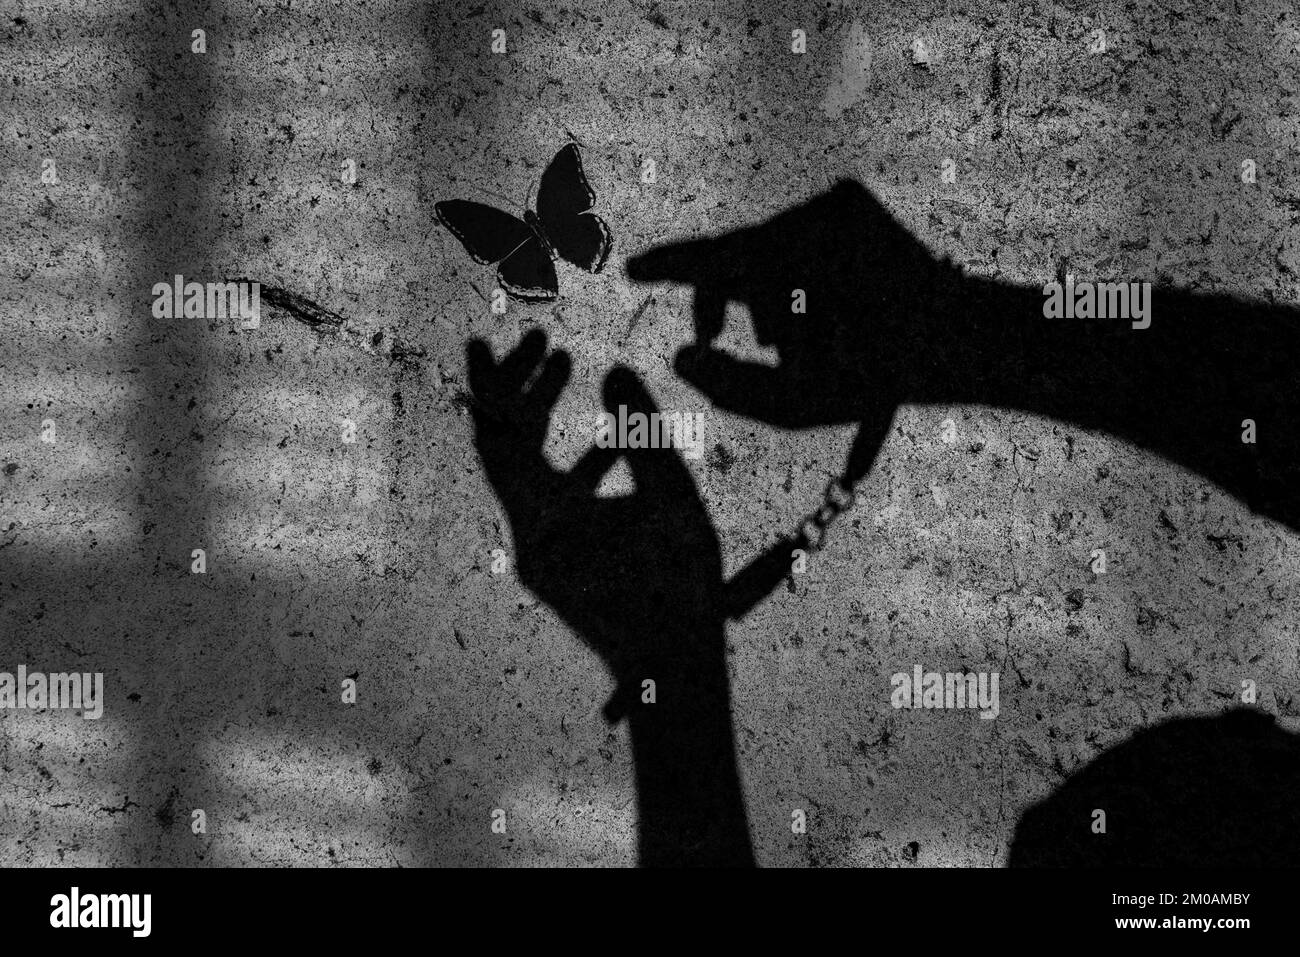 The shadow of a criminal in handcuffs against the background of a concrete prison wall. Handcuffed hands cling to freedom and try to catch a butterfly Stock Photo